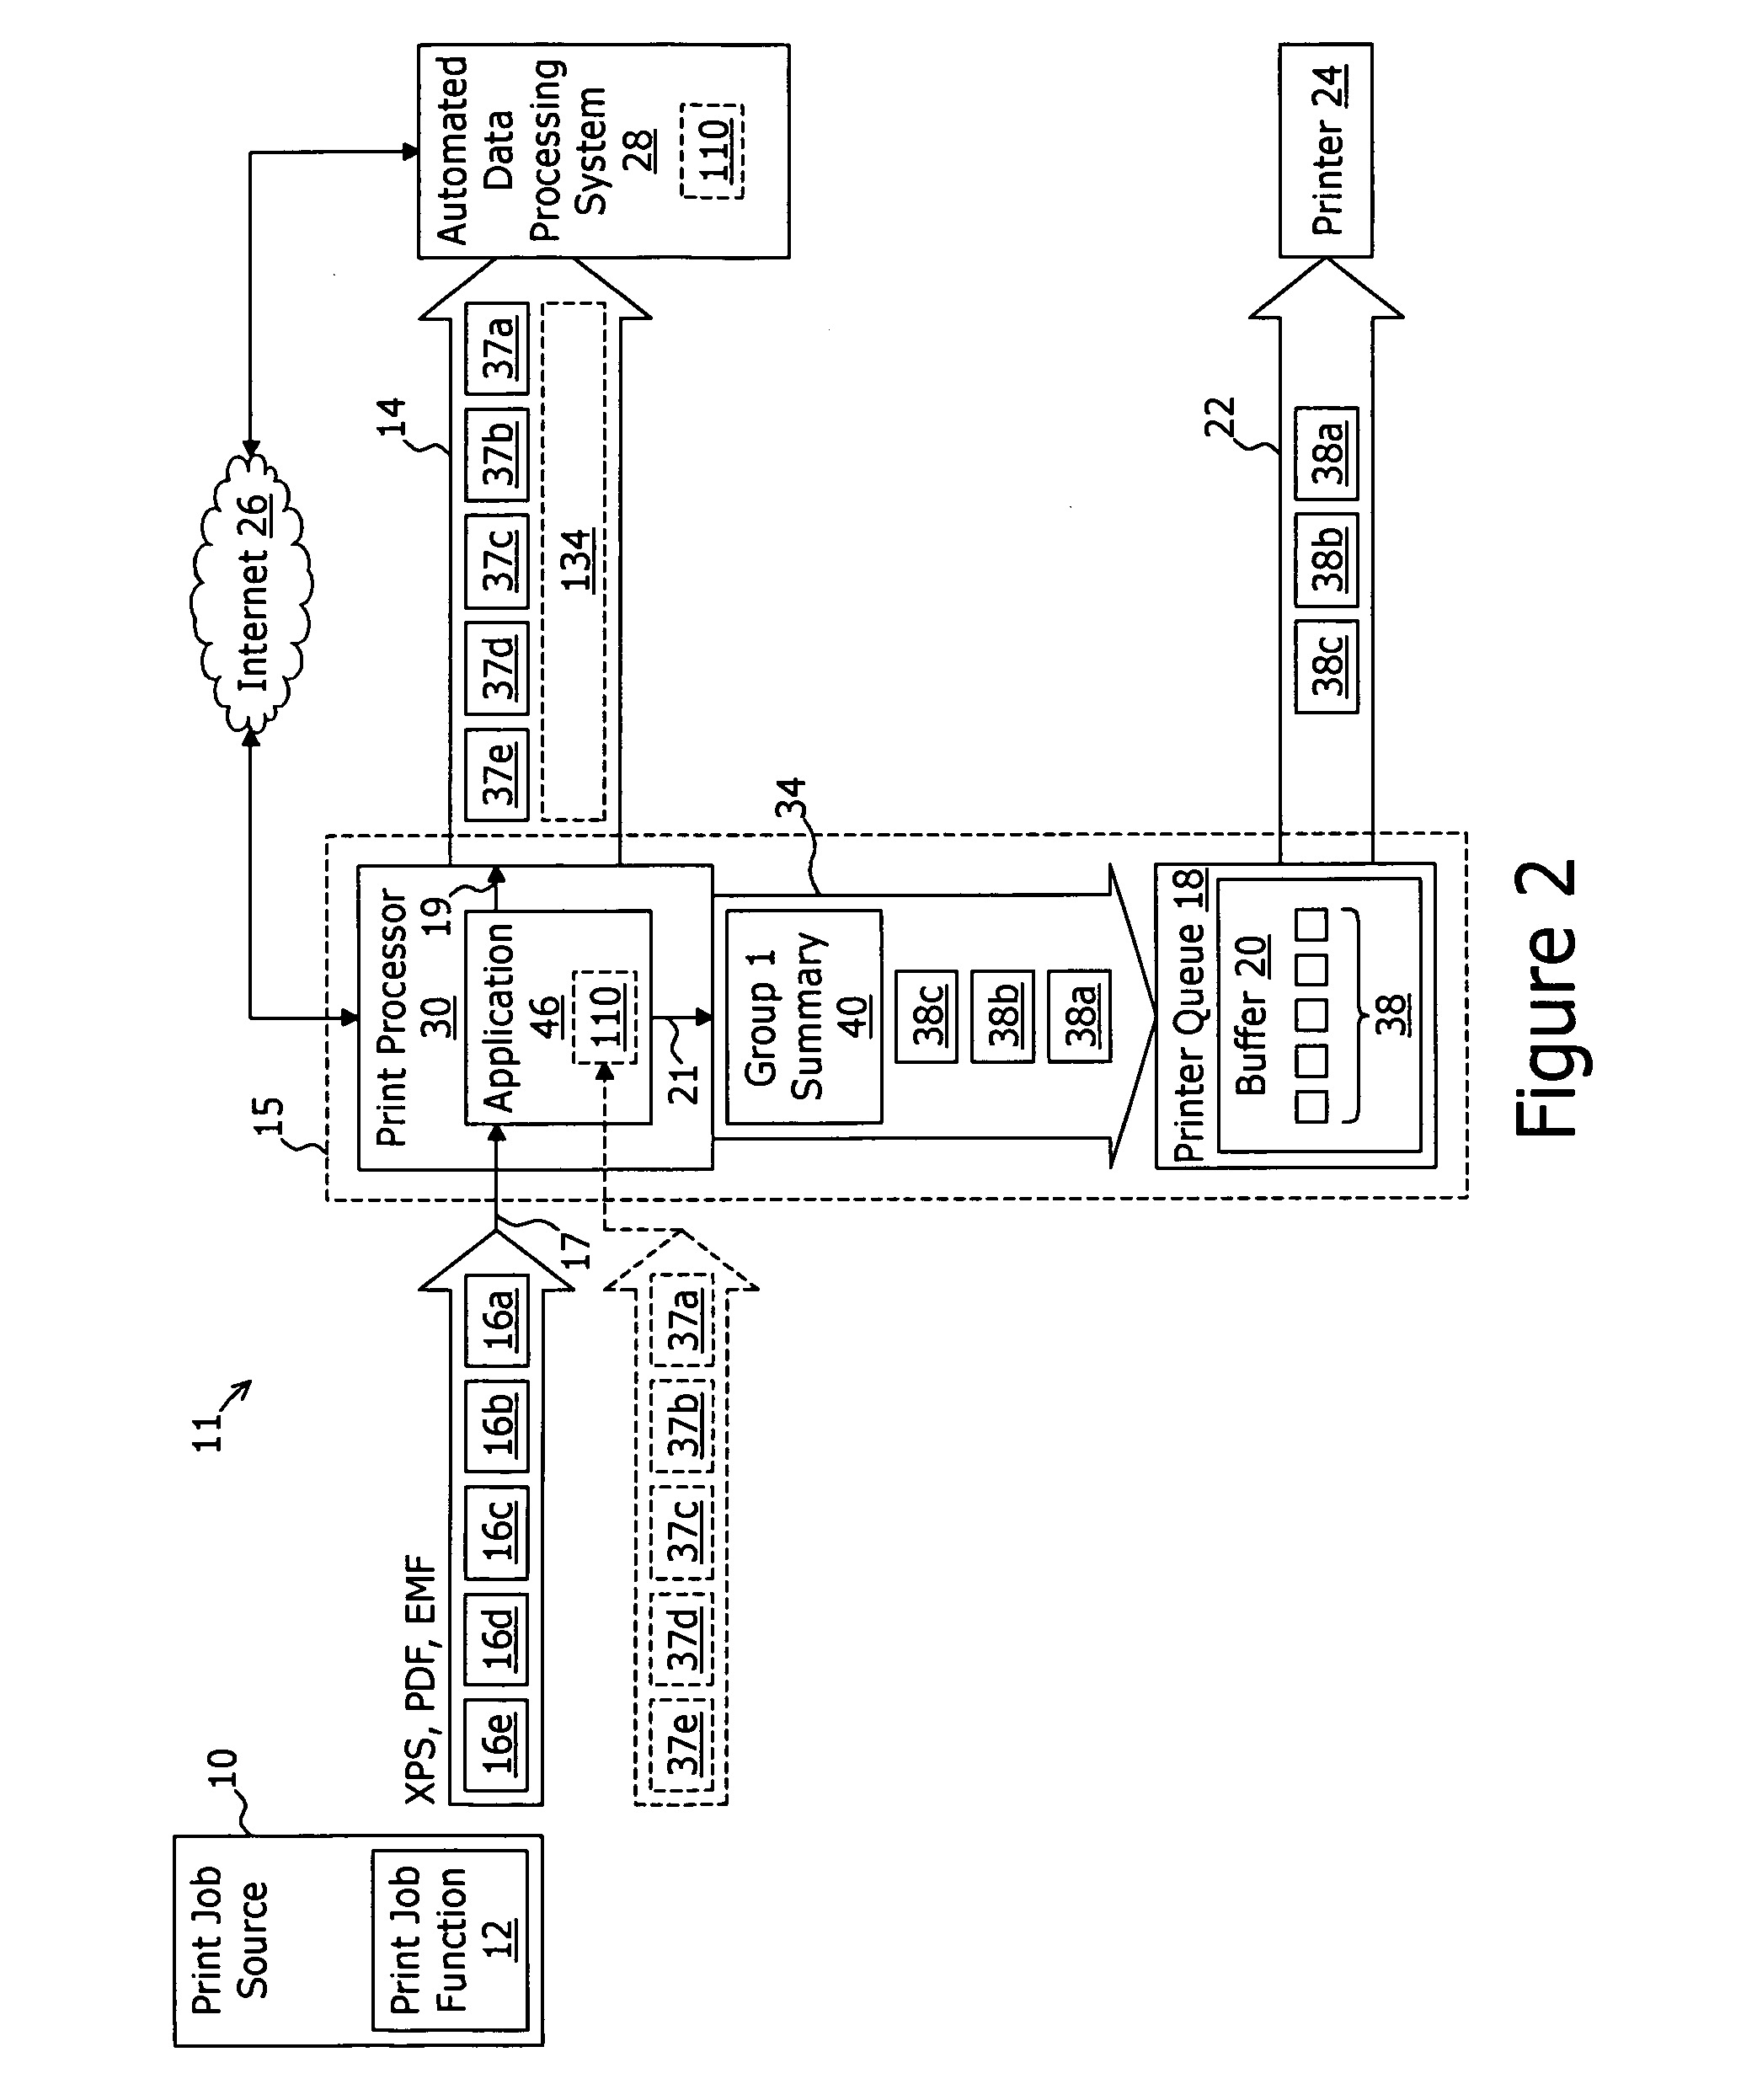 System and method for transferring invoice data output of a print job source to an automated data processing system